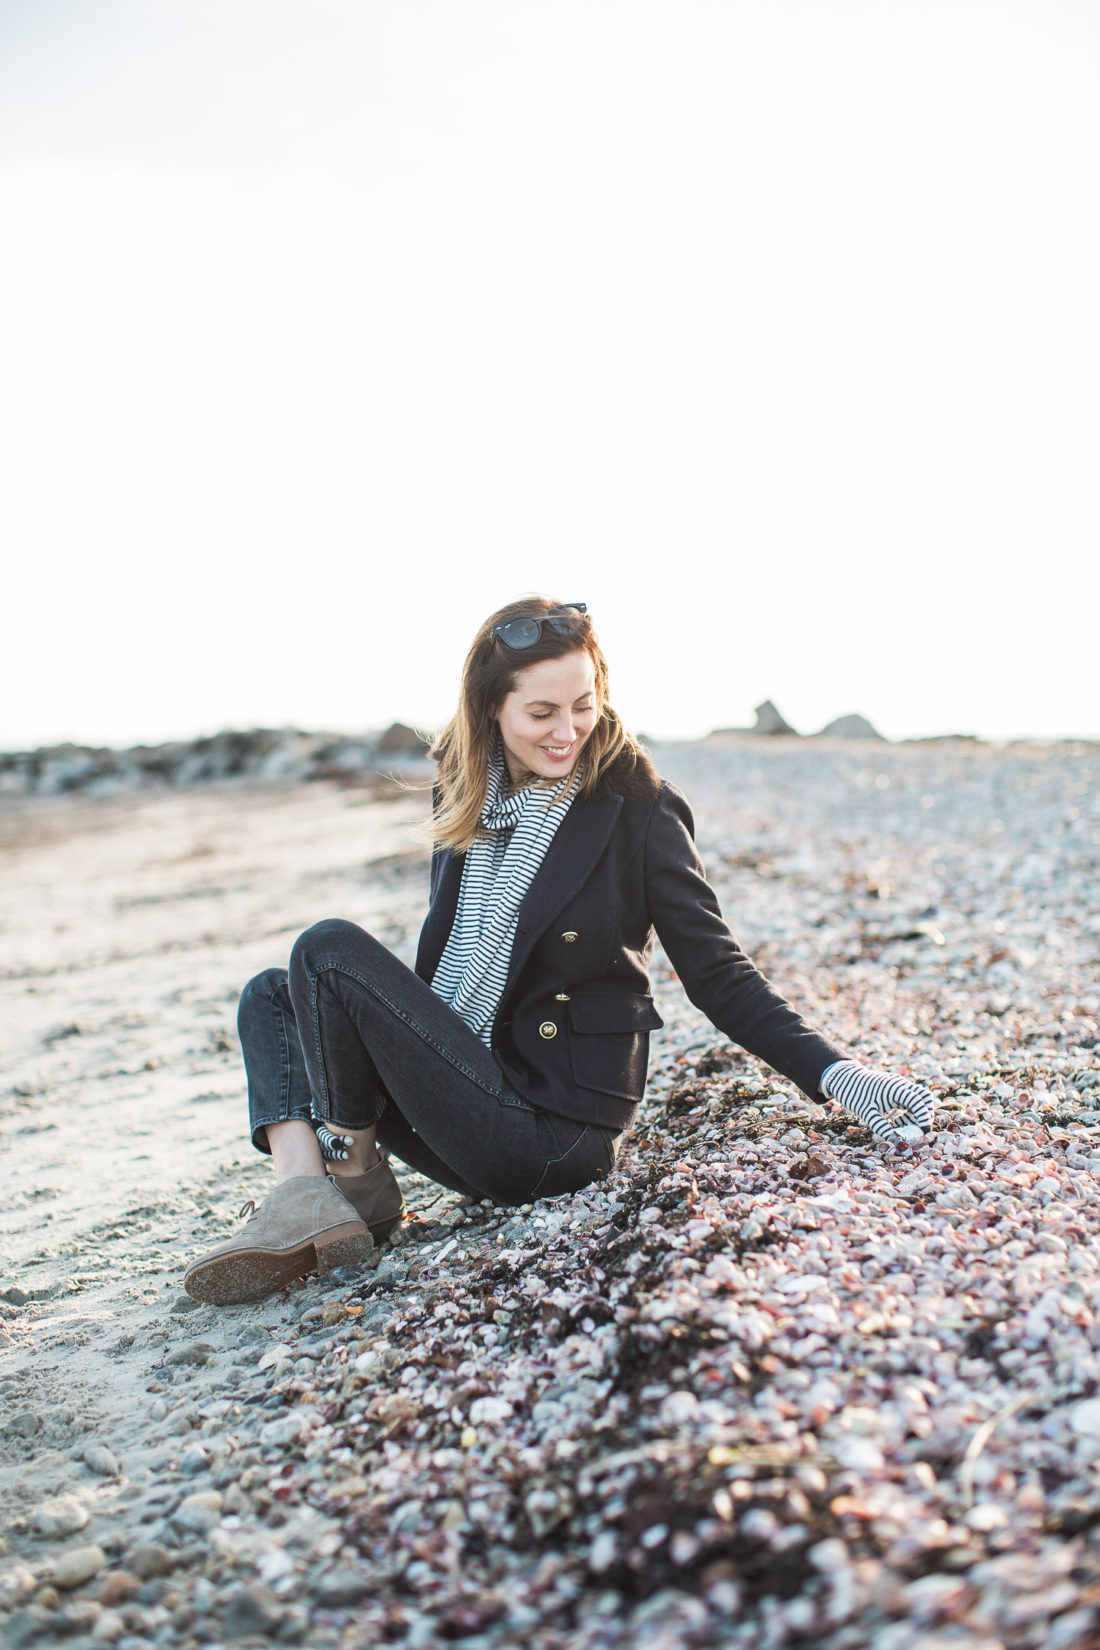 Eva Amurri Martino sits on the sand and picks up rocks in the winter on Compo Beach in Connecticut